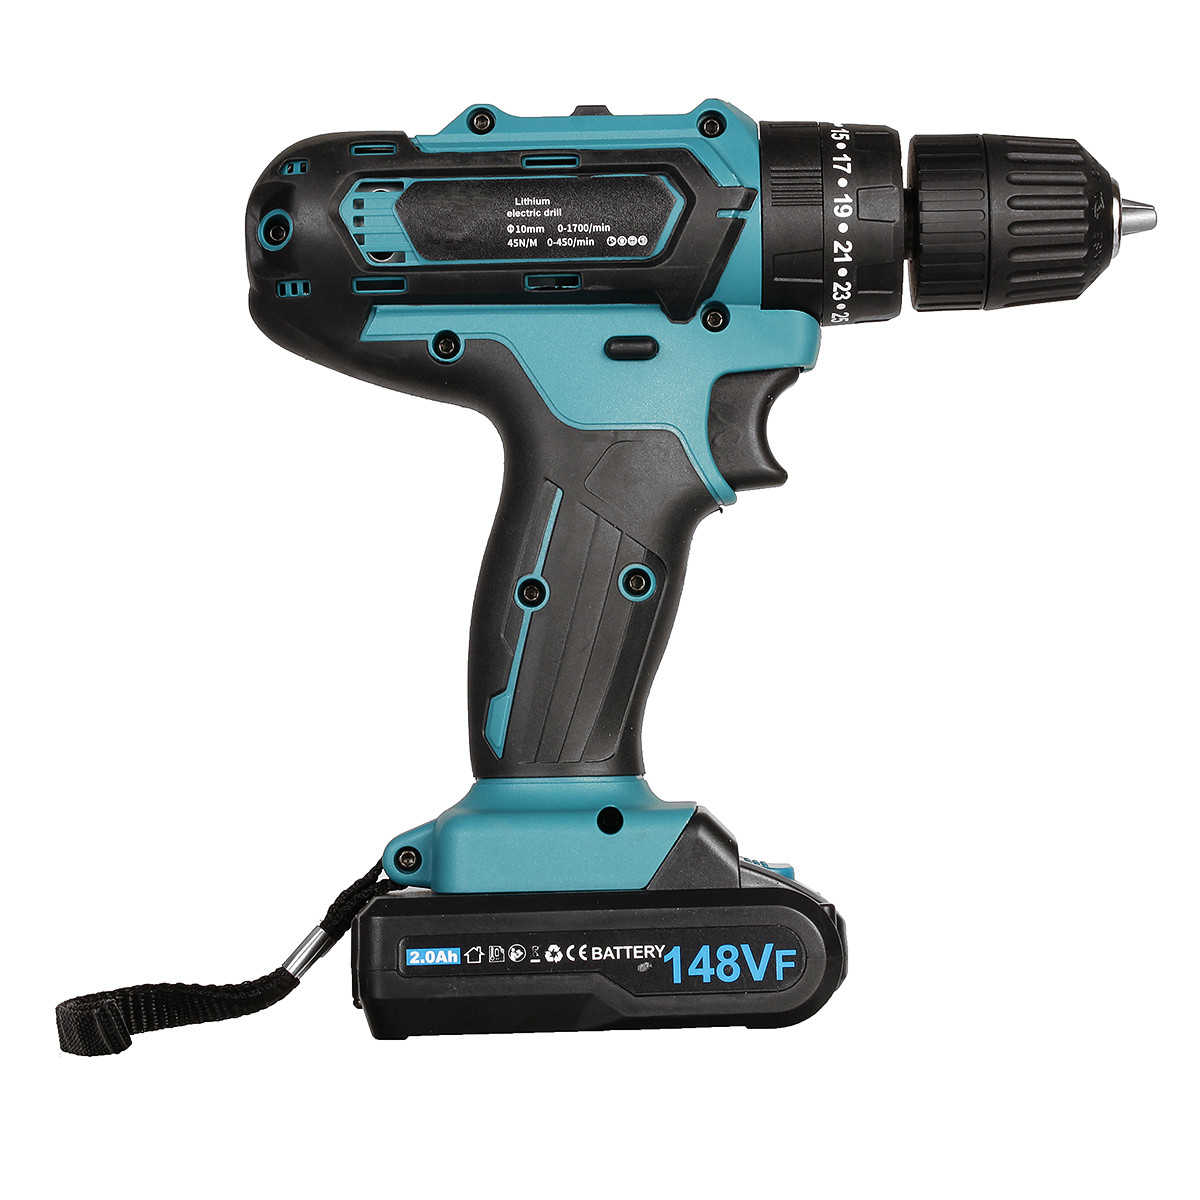 148VF-20Ah-Cordless-Electric-Impact-Drill-Rechargeable-Drill-Screwdriver-W-1-or-2-Li-ion-Battery-1888042-6